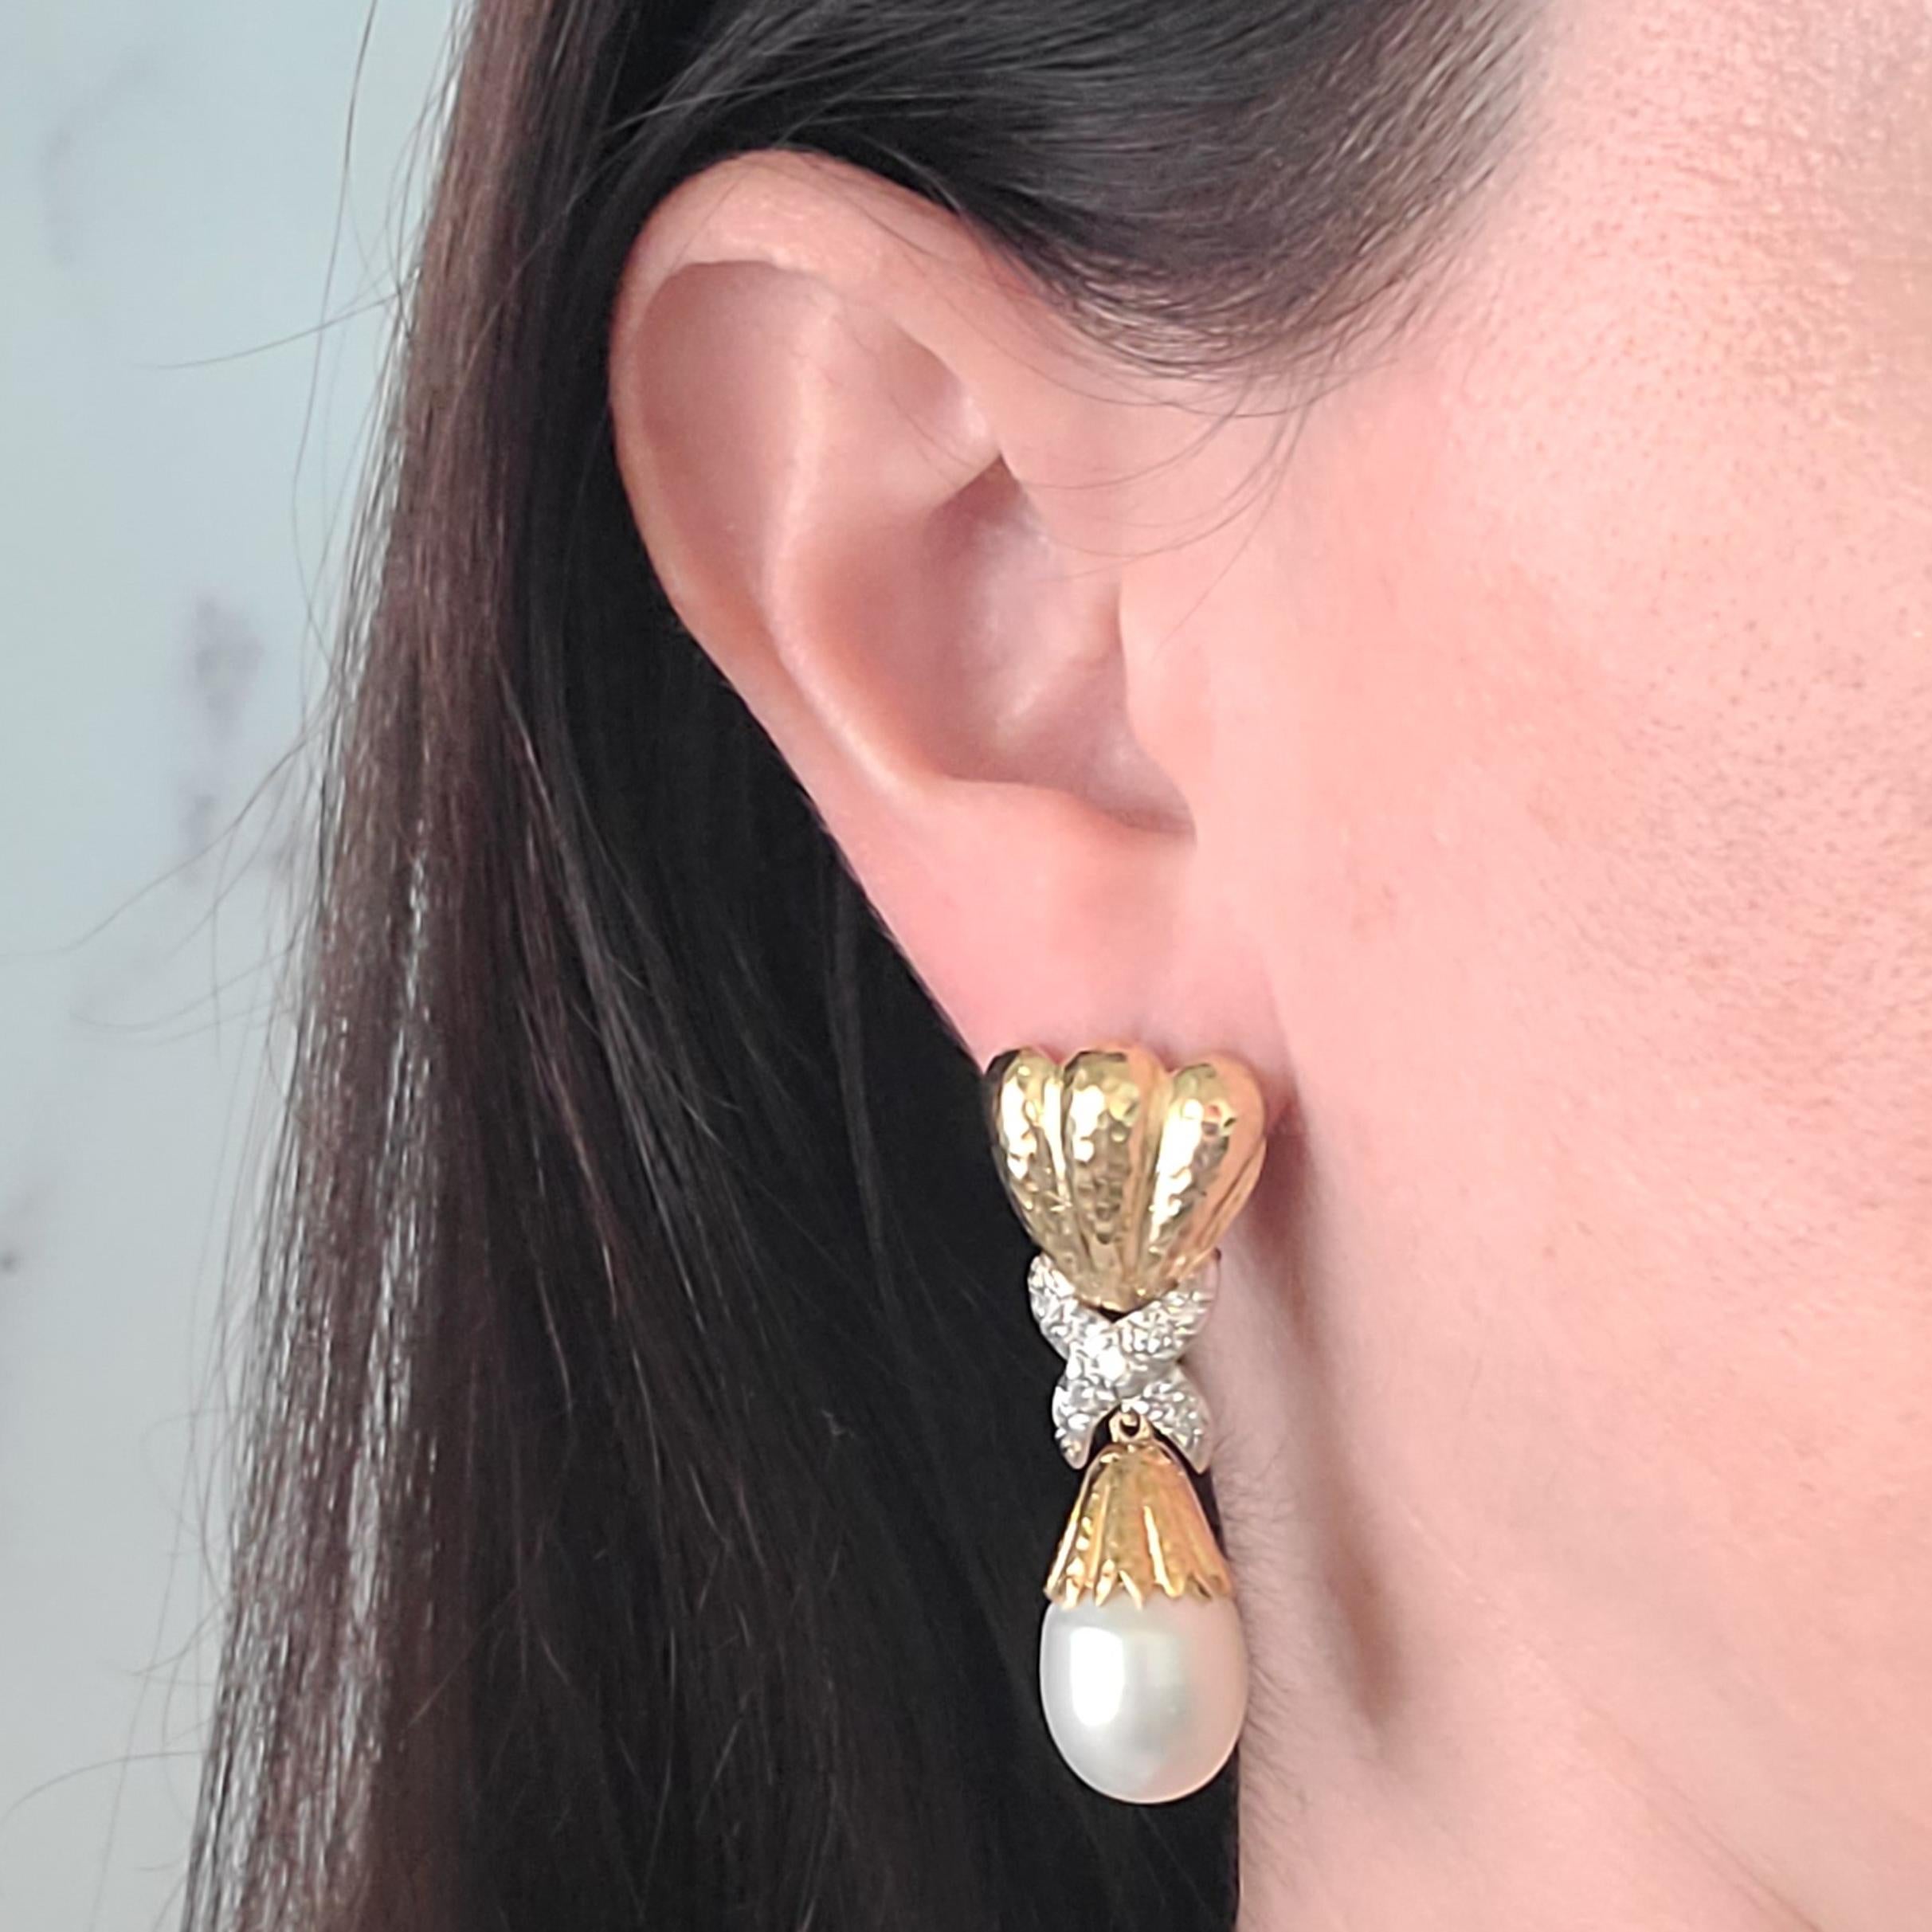 18 Karat Yellow Gold Removable Pearl Drop Earrings Featuring 2 South Sea Cultured White Pearls Measuring 12.6mm. Hammered Design With 18 Round Diamond Accents Of VS Clarity and G Color Total Approximately 0.60 Carats. 2 Inches Long With Pierced Post